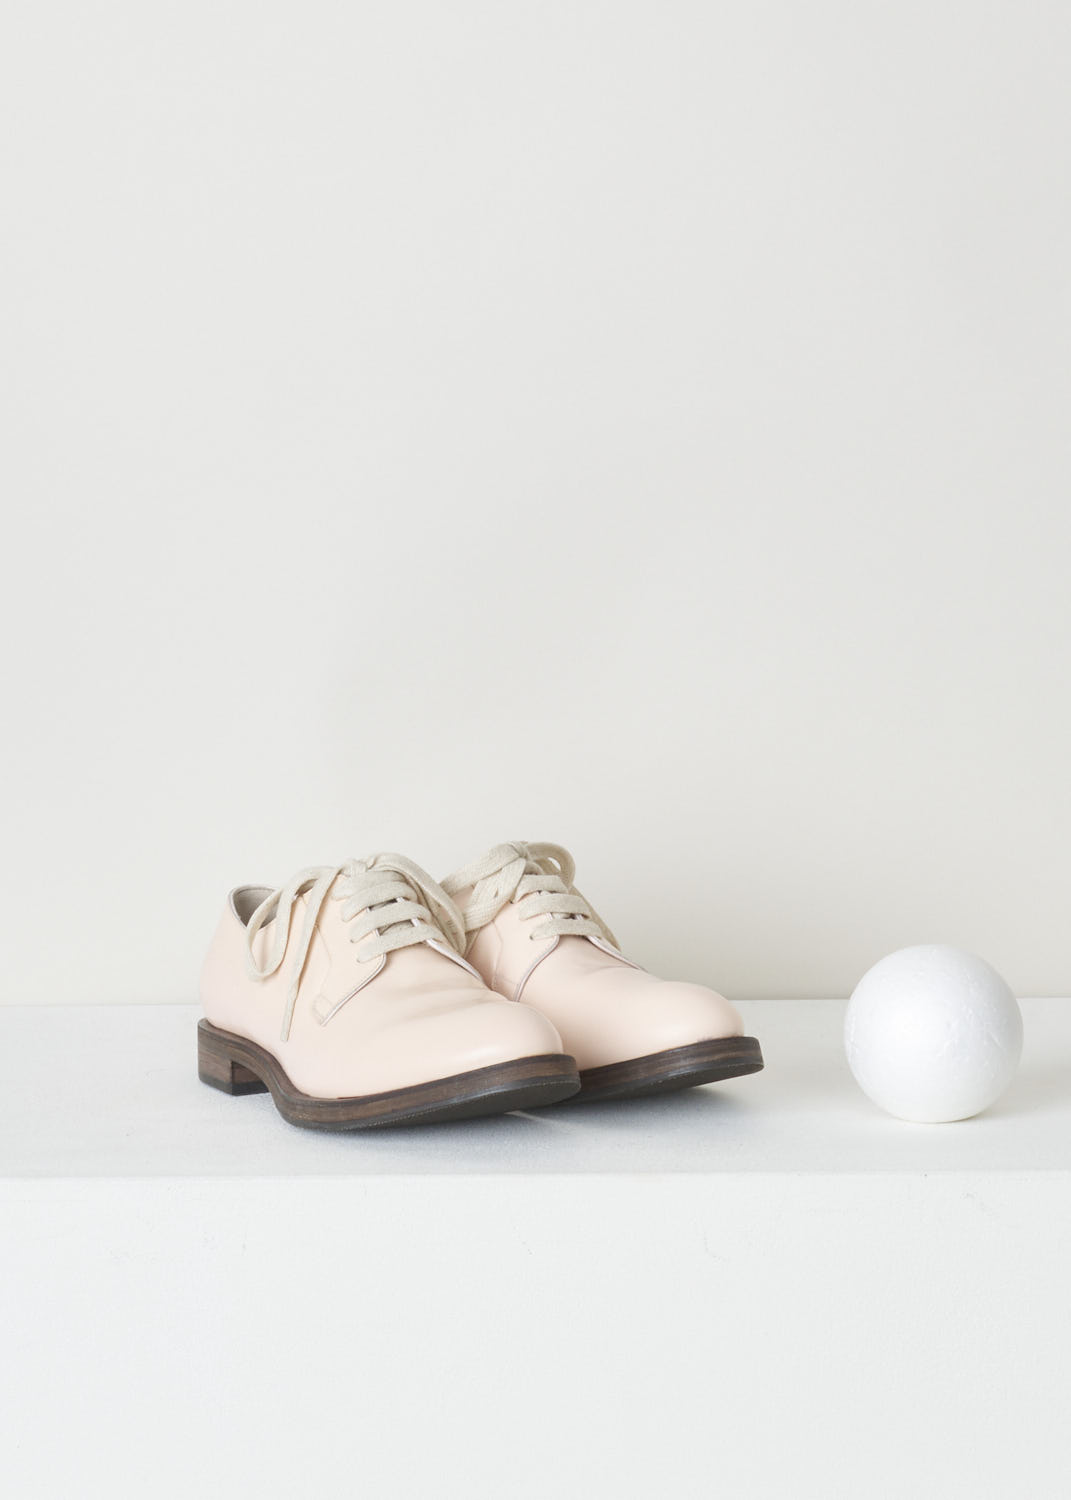 BRUNELLO CUCINELLI, BLUSH PINK DERBY SHOES, MZDVLC113_C6203, Pink, Front, Pale blush pink leather derby shoes with a shiny finish. This model has a classic lace-up closure. These shoes have a rounded toe. The sole is a contrasting dark brown color. 

Heel height: 1.5 cm / 0.5 inch 
